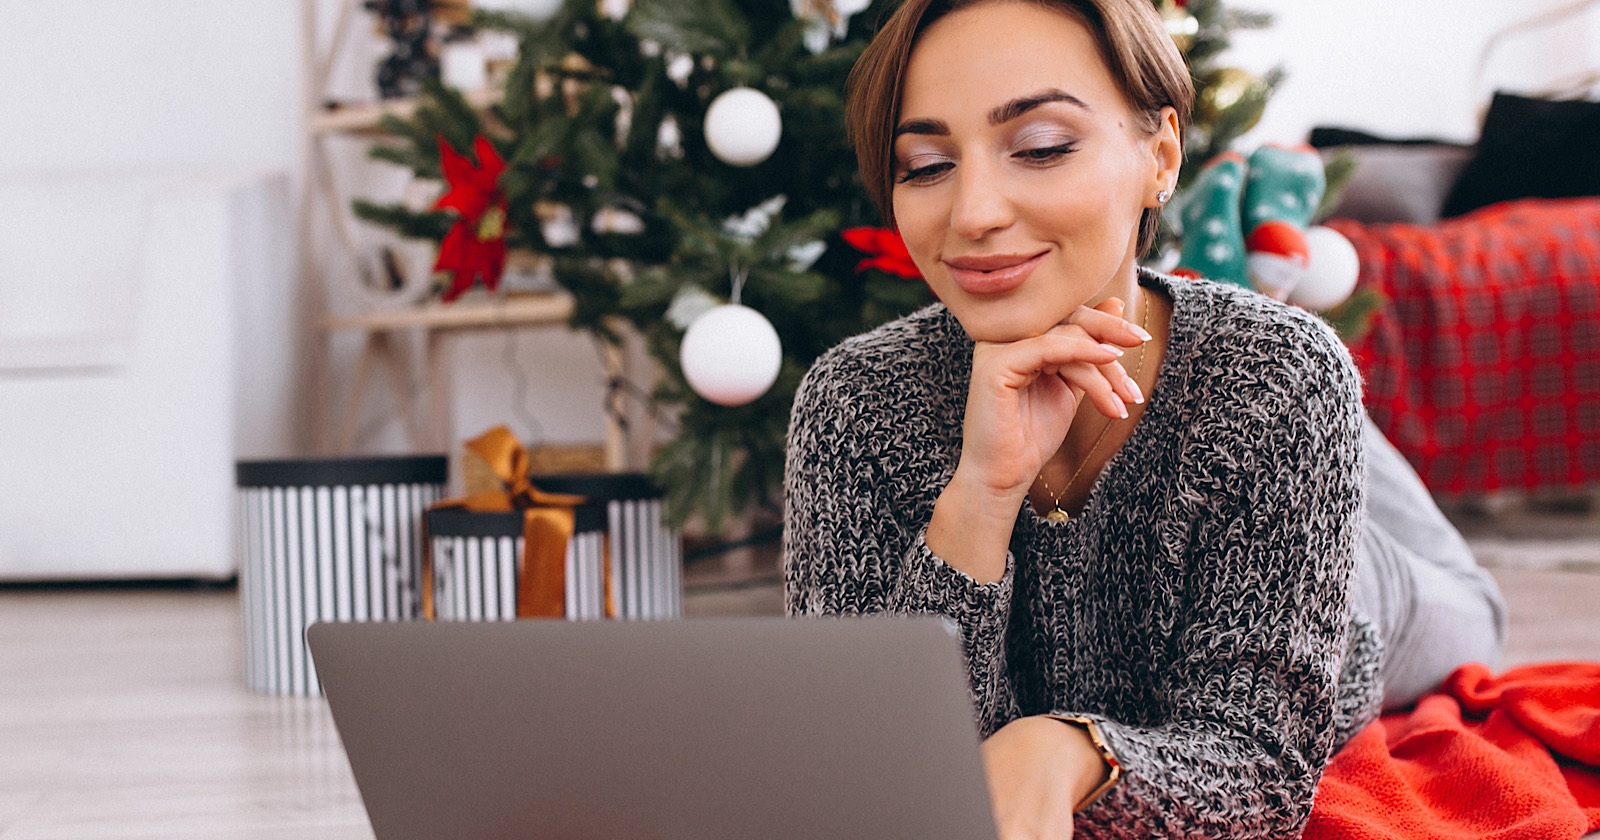 google shares 16 stats about holiday shoppers via mattgsouthern